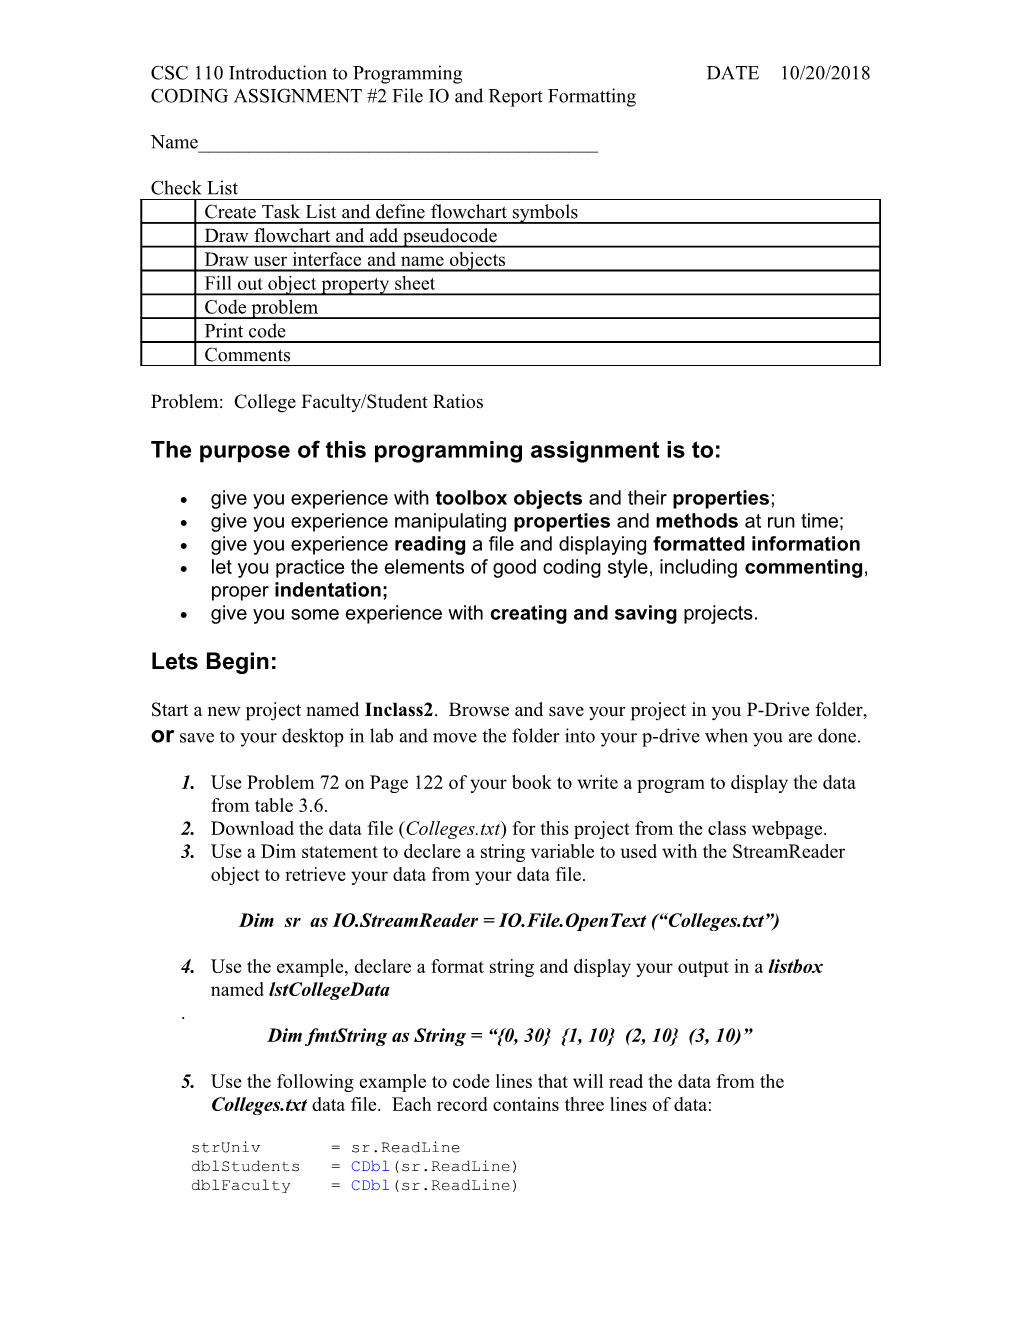 CODING ASSIGNMENT #2 File IO and Report Formatting